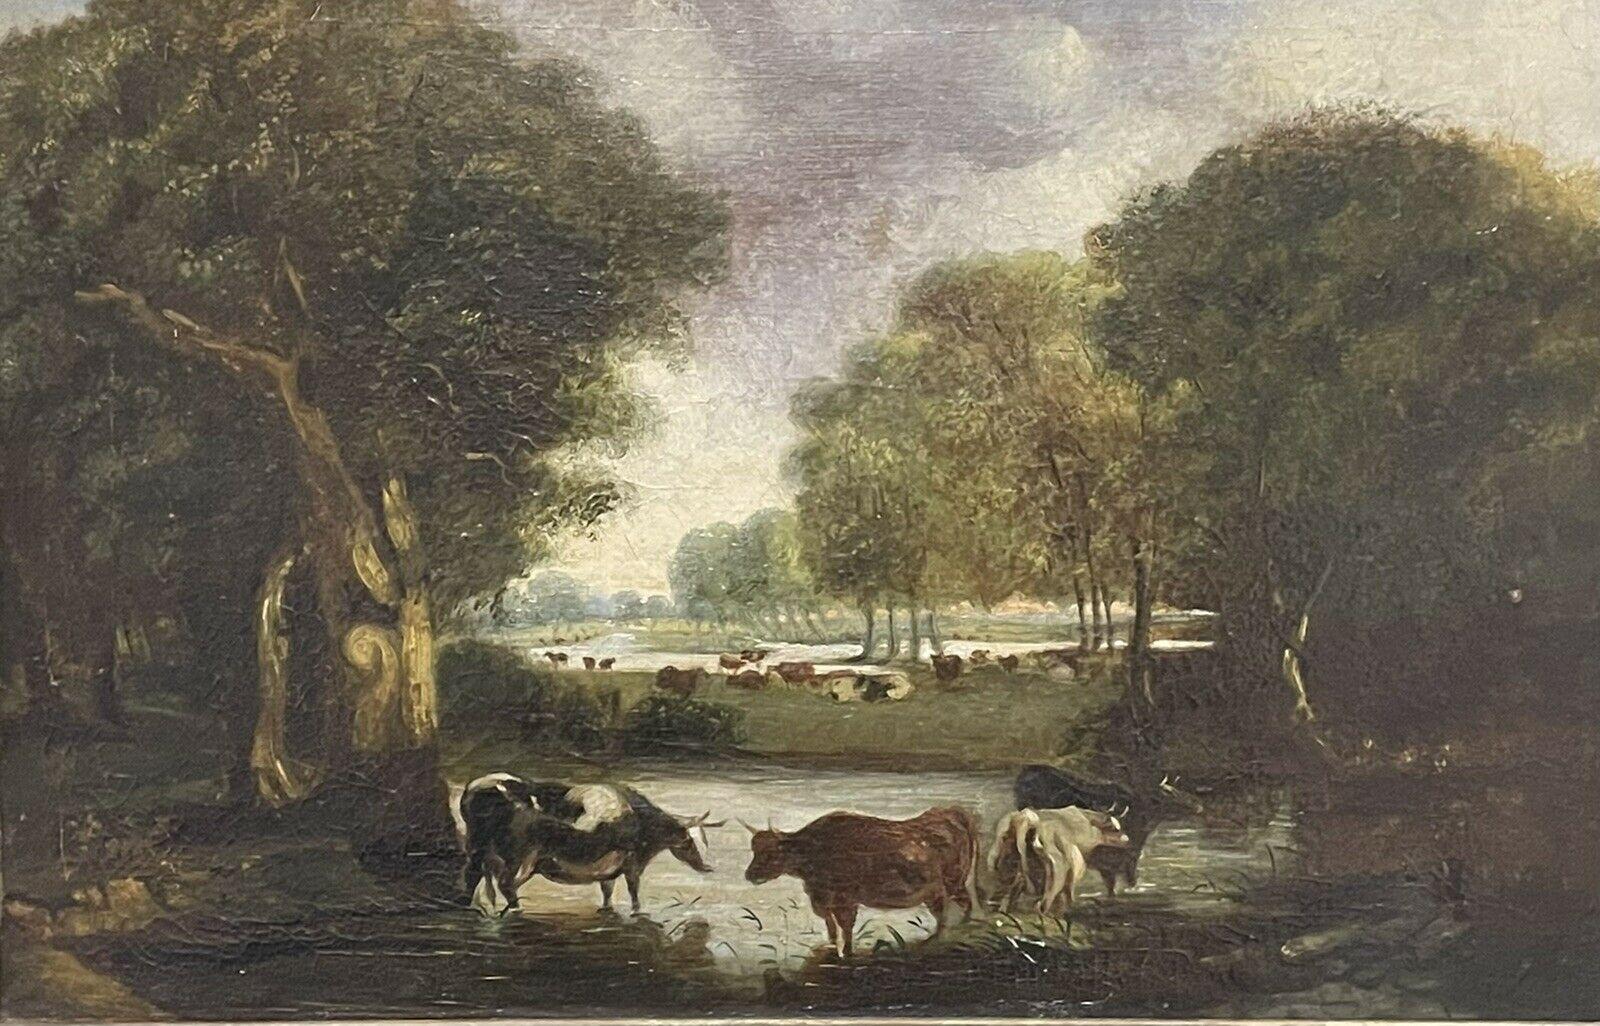 Unknown Landscape Painting - VICTORIAN 19TH CENTURY ENGLISH OIL PAINTING - CATTLE DRINKING FROM WOODLAND POOL